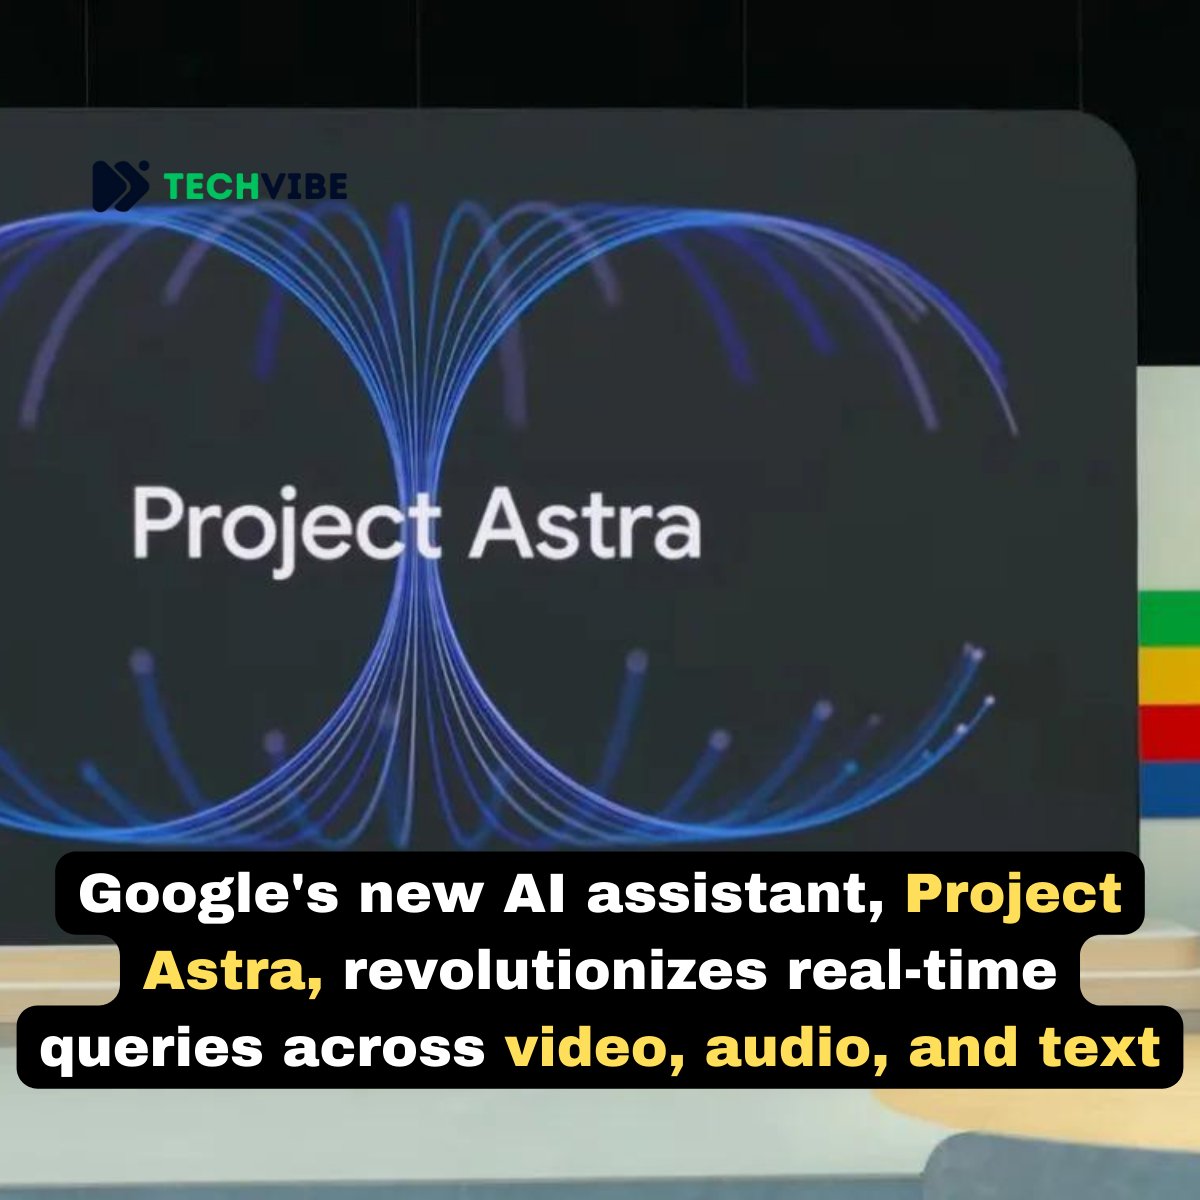 Google's latest AI breakthrough, Project Astra, introduces an AI assistant capable of answering real-time queries across video, audio, and text, marking a significant leap forward in AI technology. more: t.ly/lIi-a #Google #ProjectAstra #Astra #AI